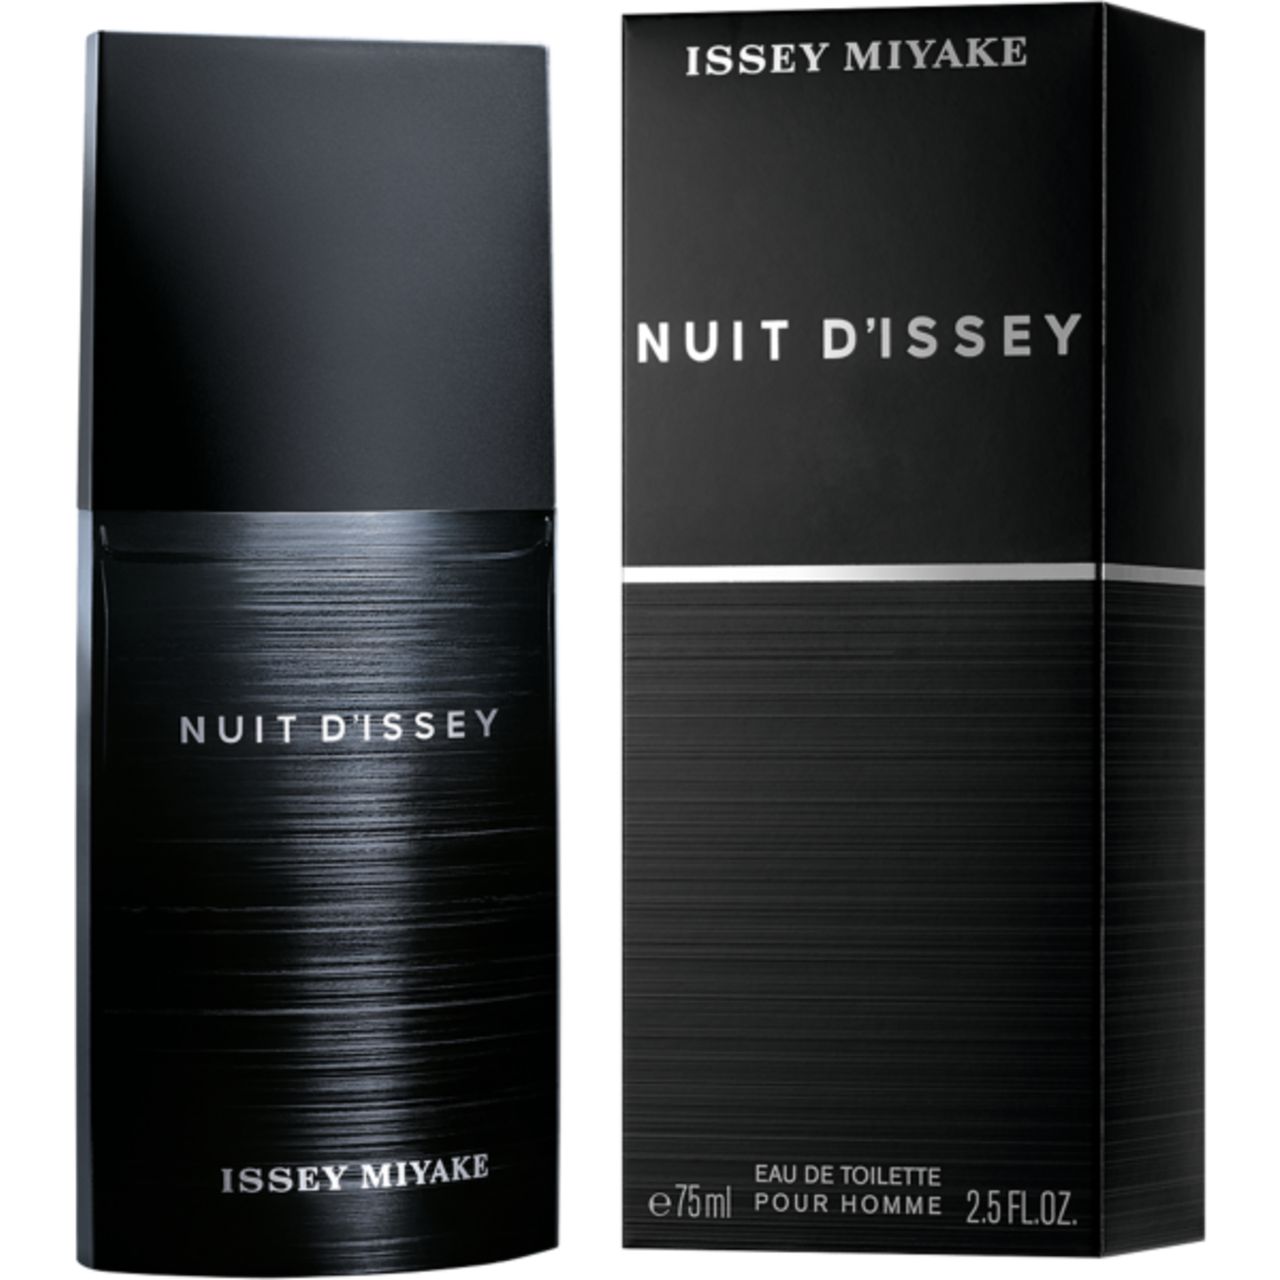 Issey Miyake, Nuit d'Issey E.d.T. Nat. Spray